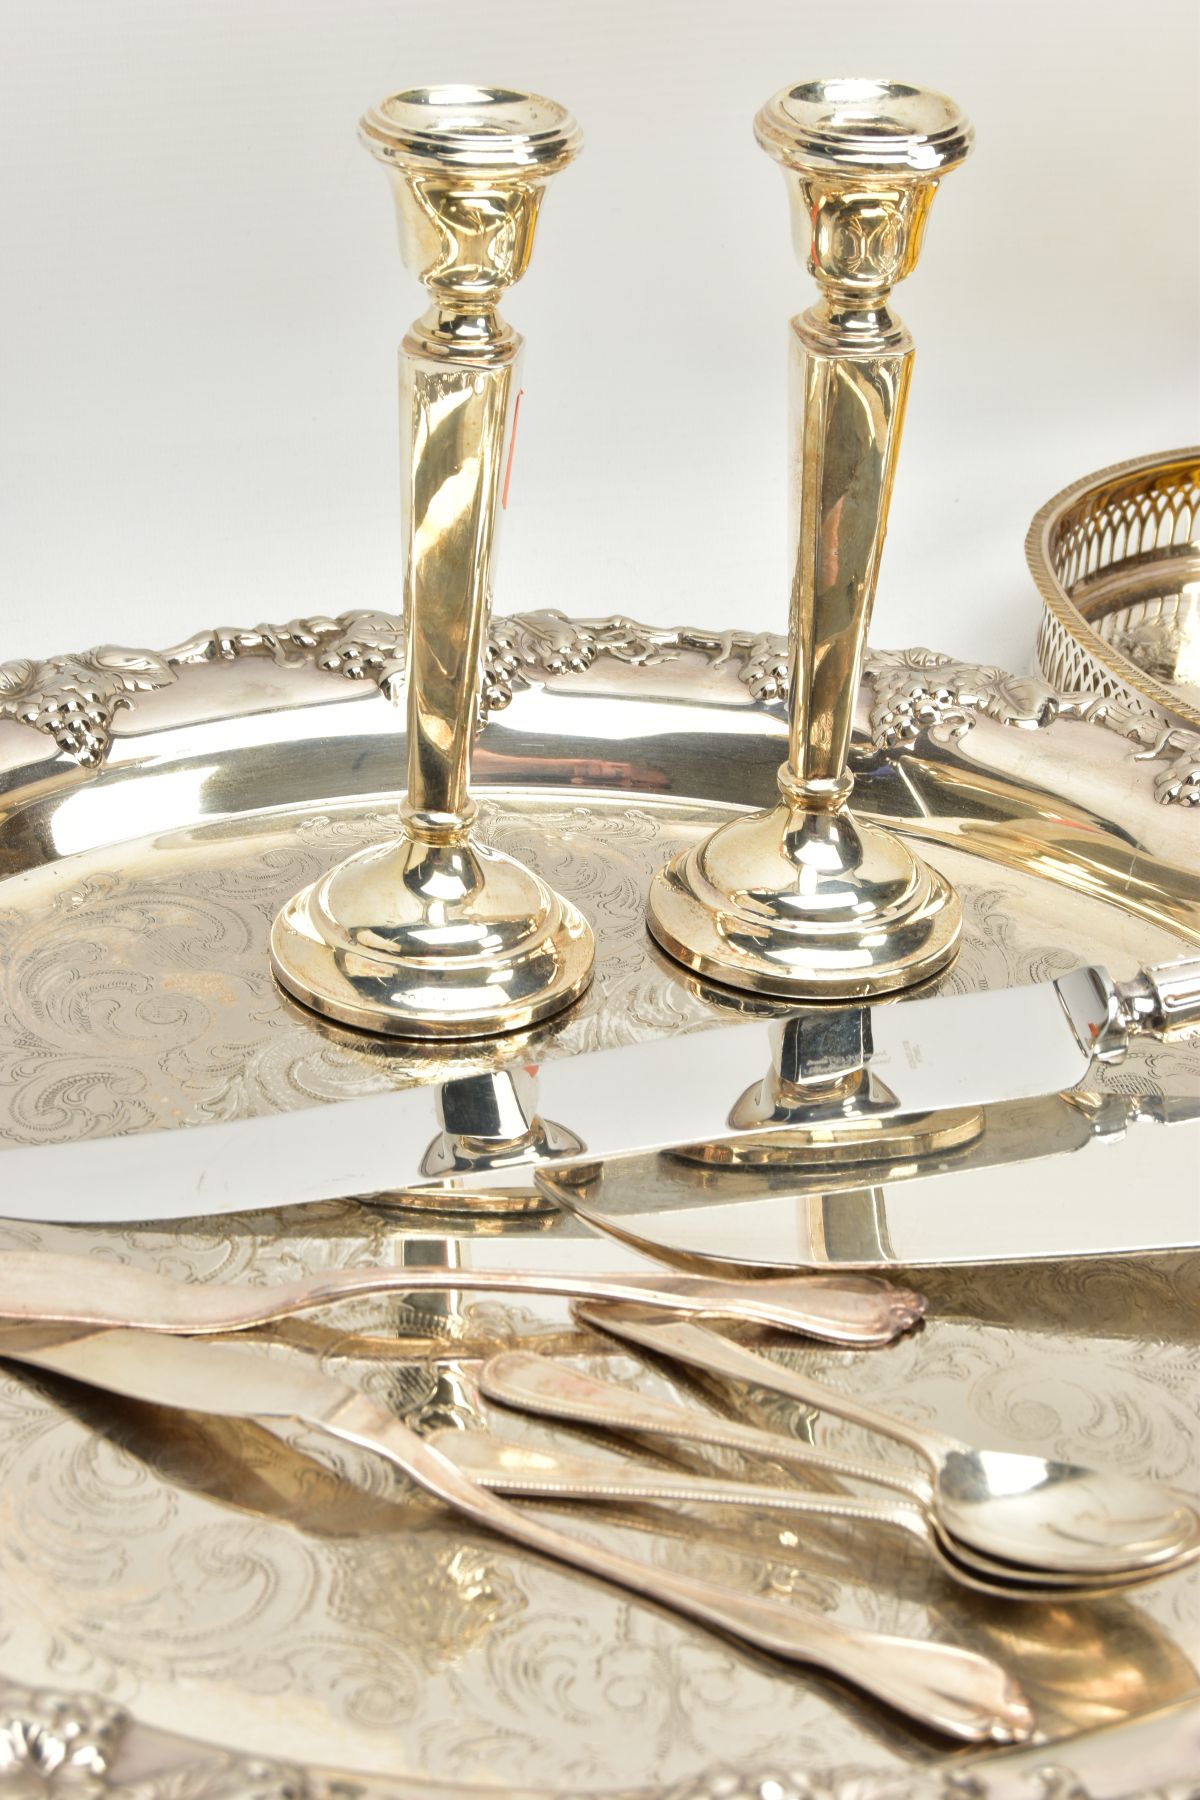 A PAIR OF SILVER CANDLESTICKS AND WHITE METAL WARE, the pair of silver candle sticks with tapered - Image 2 of 5